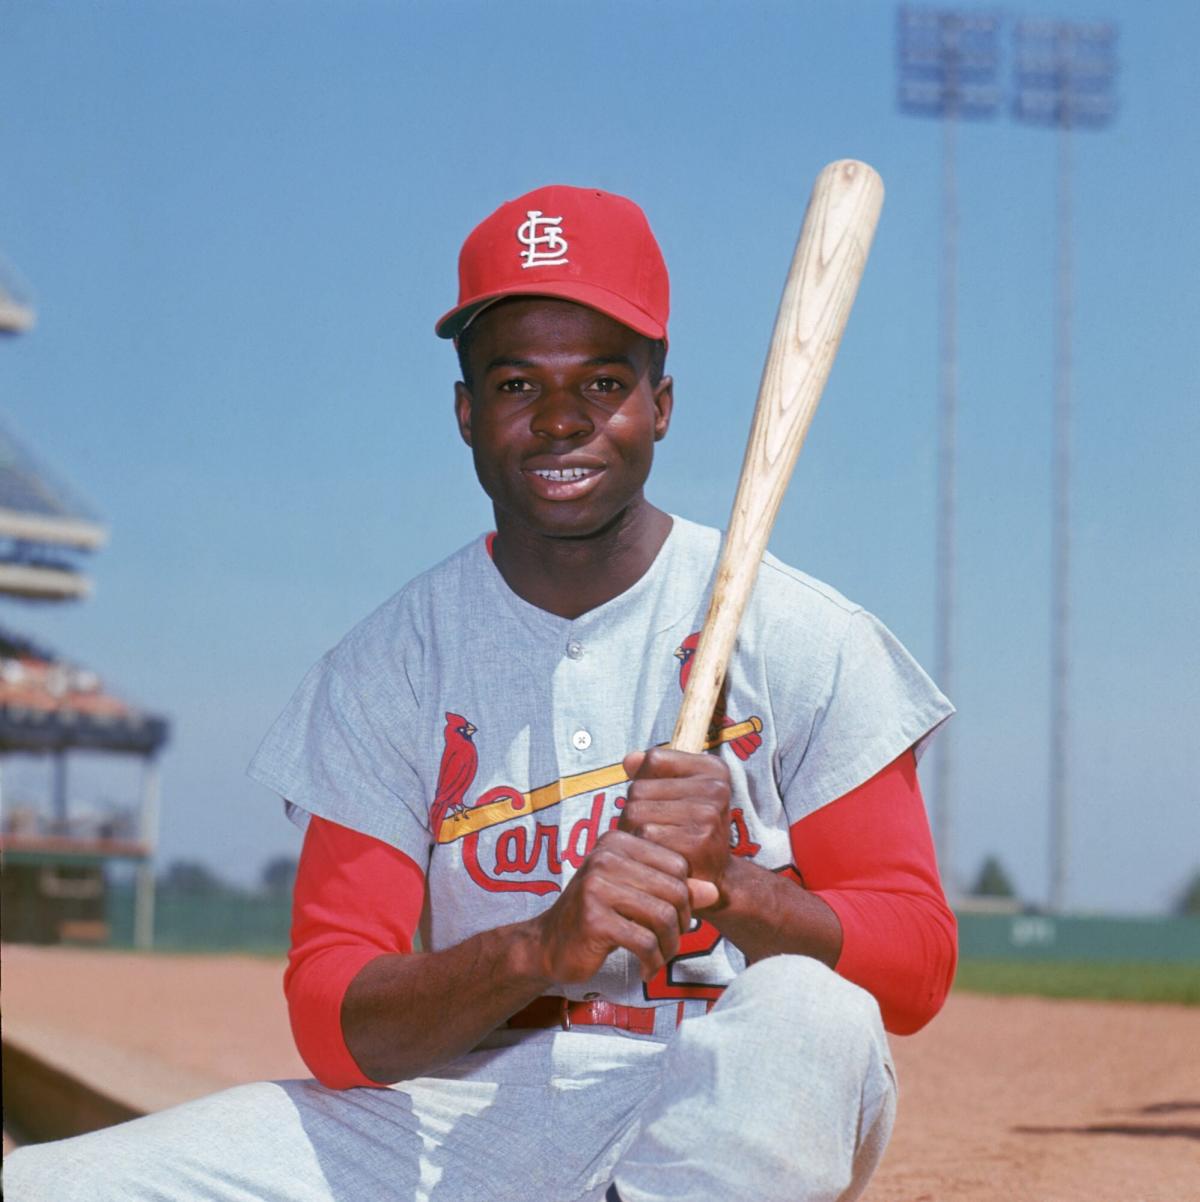 Lou Brock Jr. pays tribute to his dad